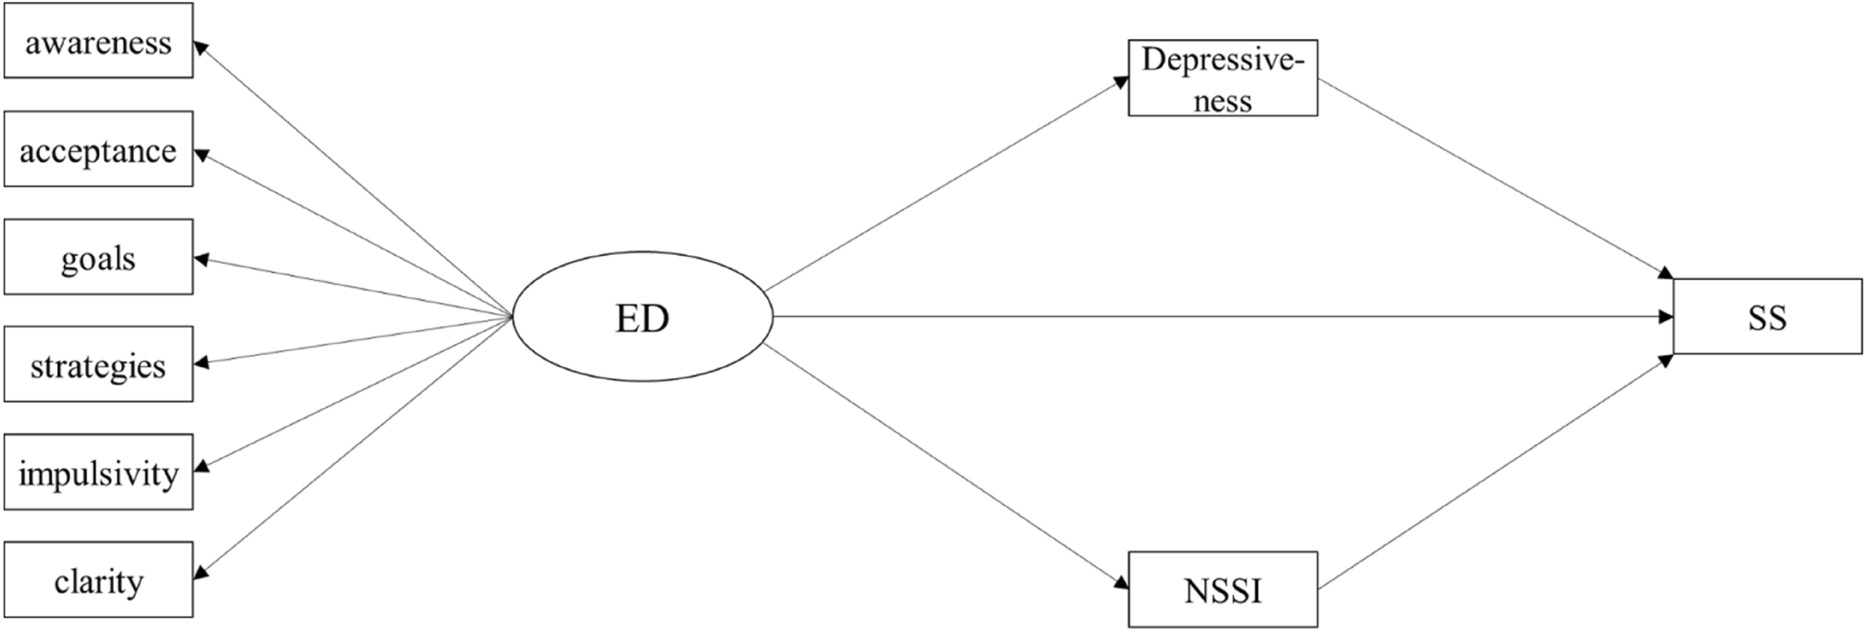 Emotional dysregulation and its pathways to suicidality in a community-based sample of adolescents